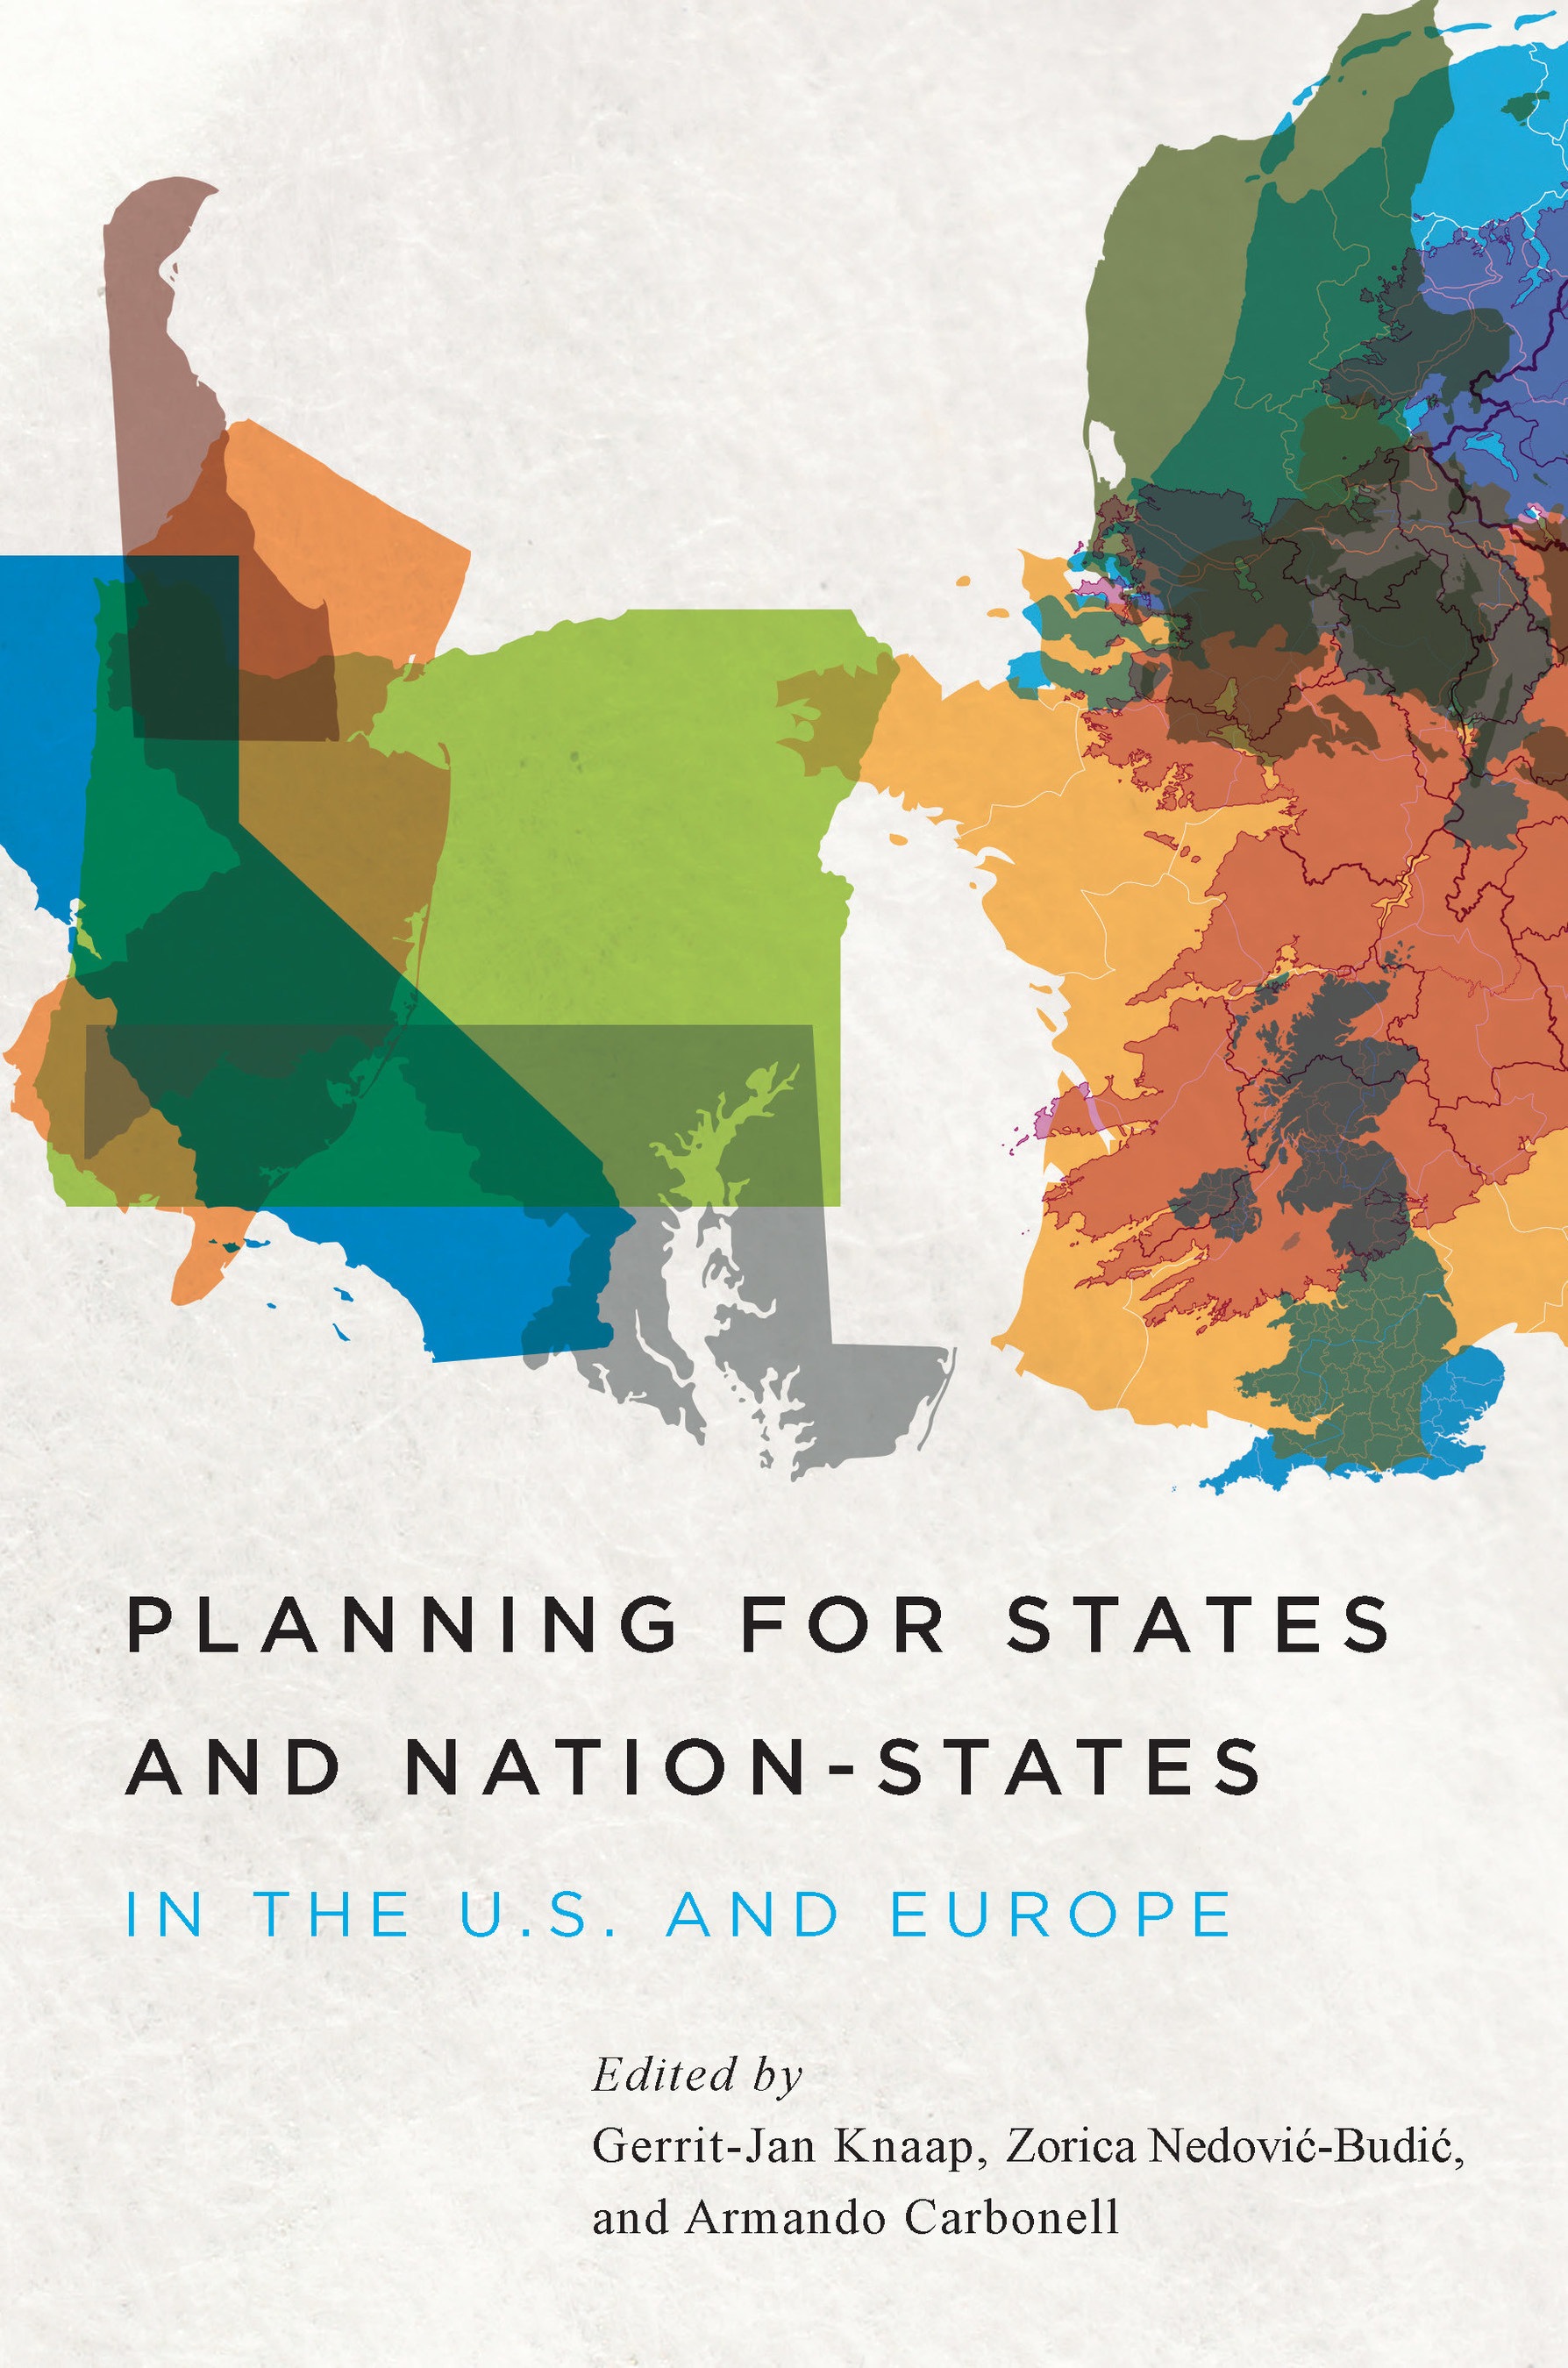 Planning for States and Nation-States, published by the Lincoln Institute of Land Policy, examines high-level planning in the U.S. and Europe